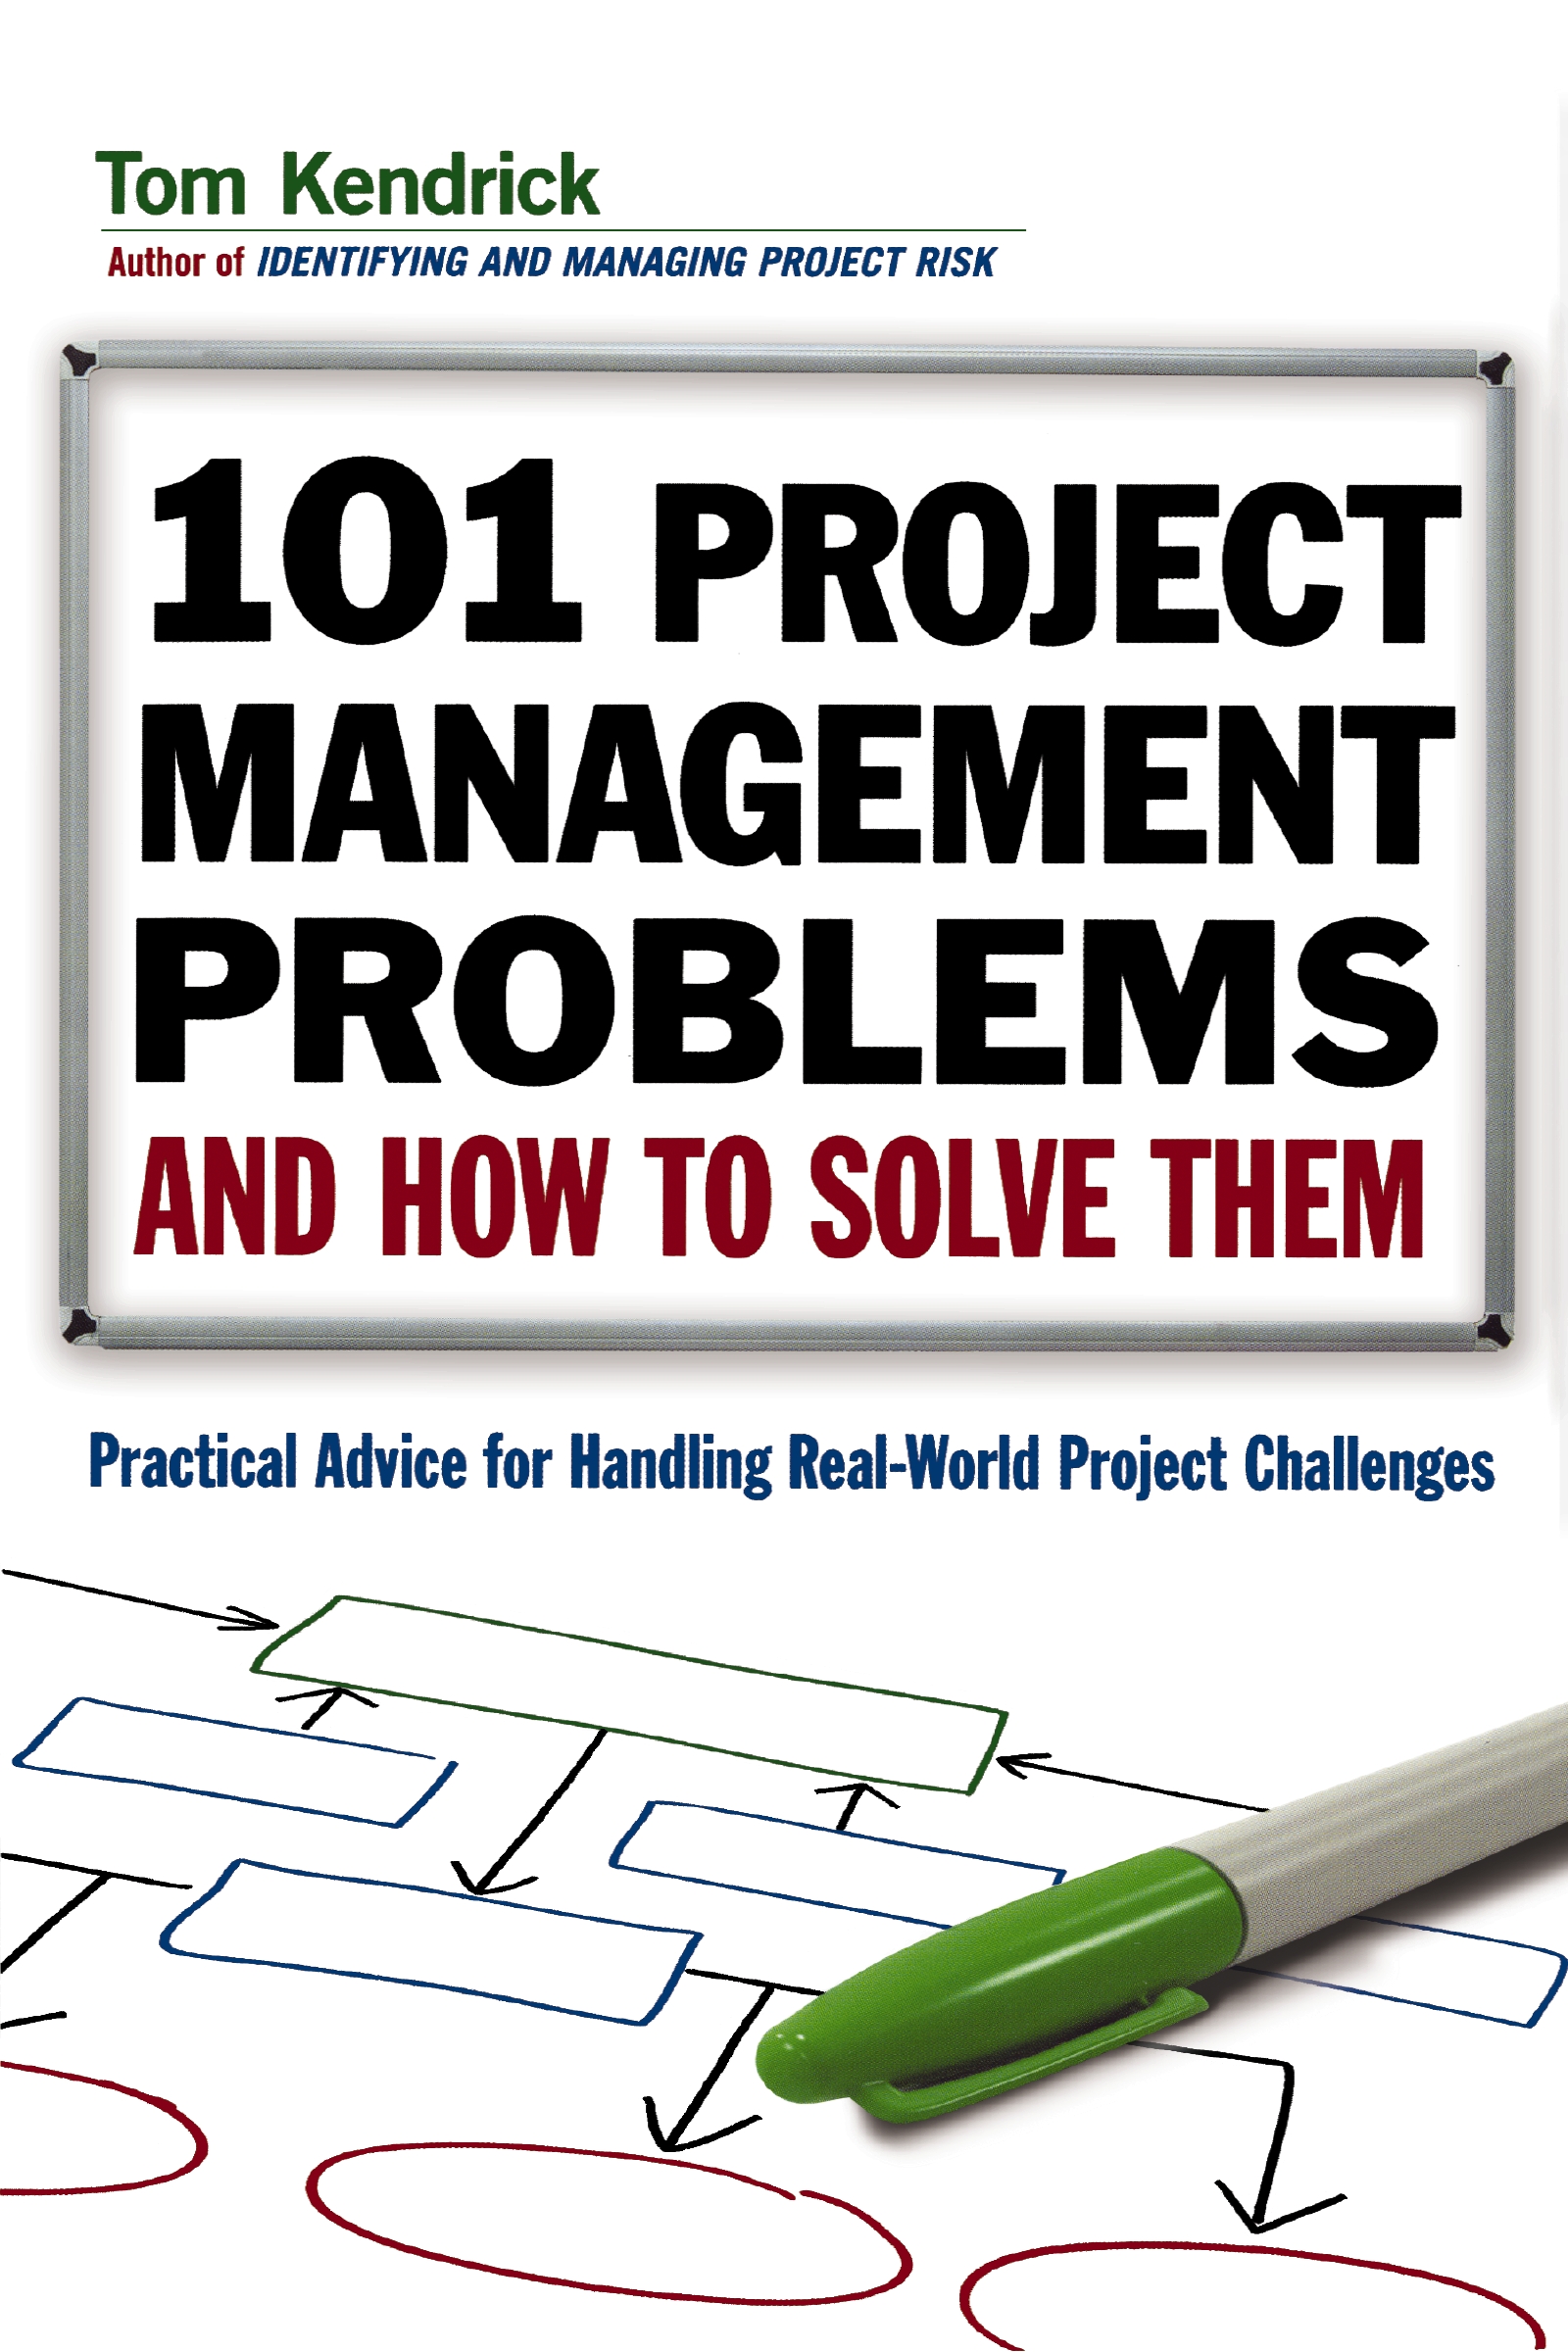 101 project management problems and how to solve them practical advice for handling real-world project challenges cover image